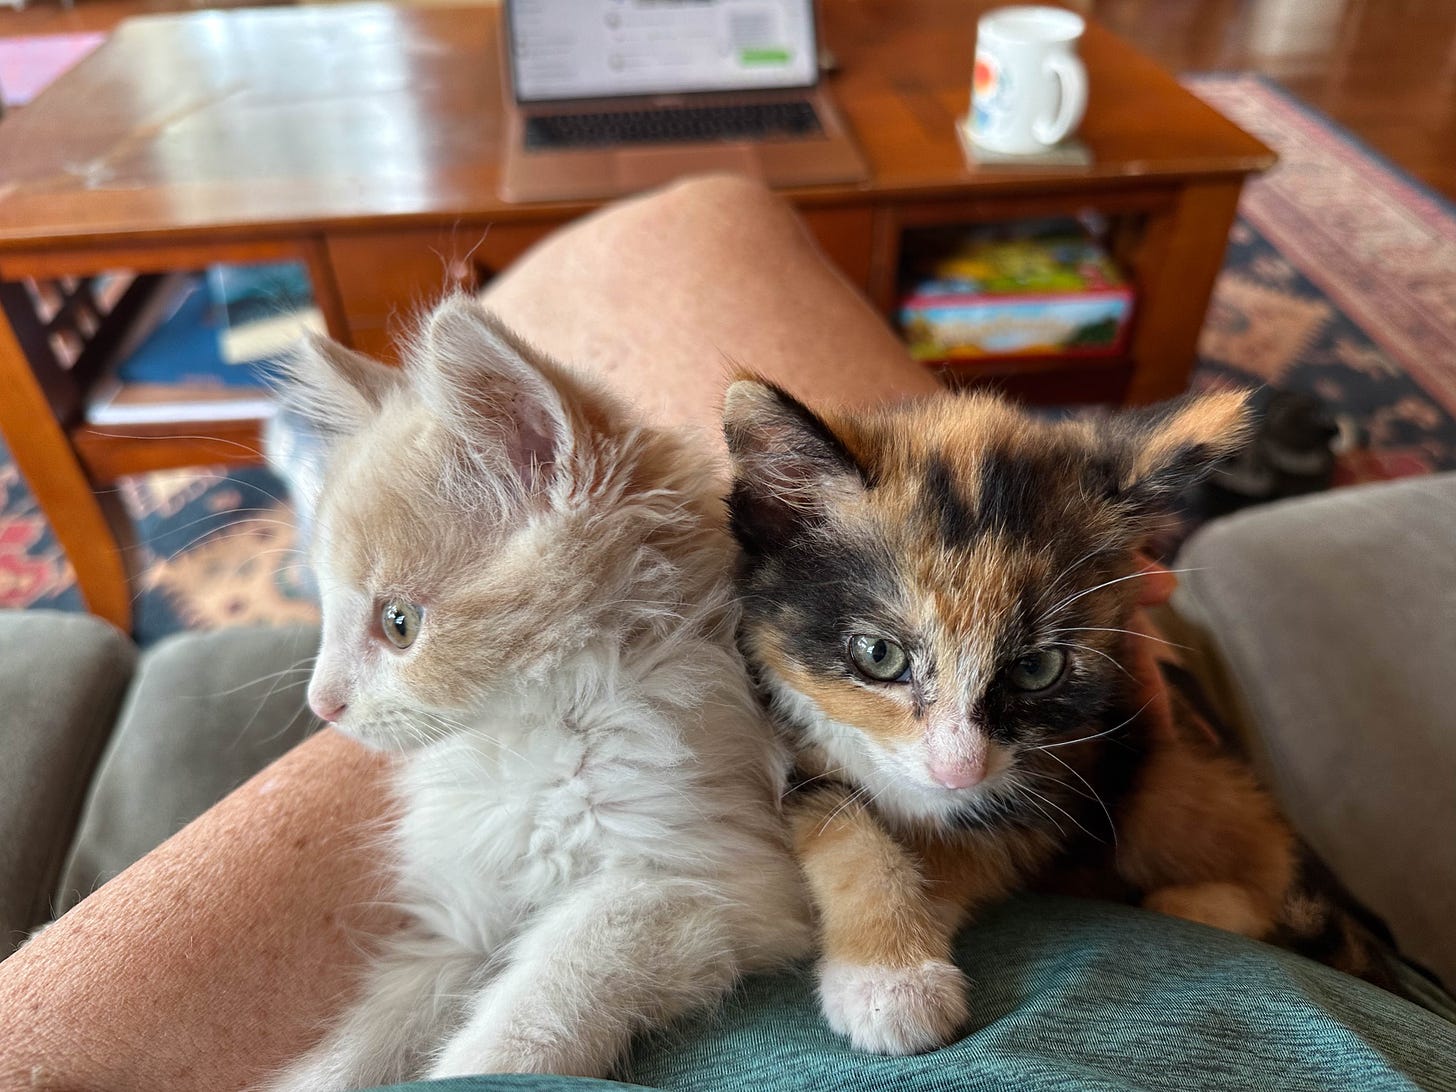 Kittens, one ginger and one calico, cuddling on author's lap.